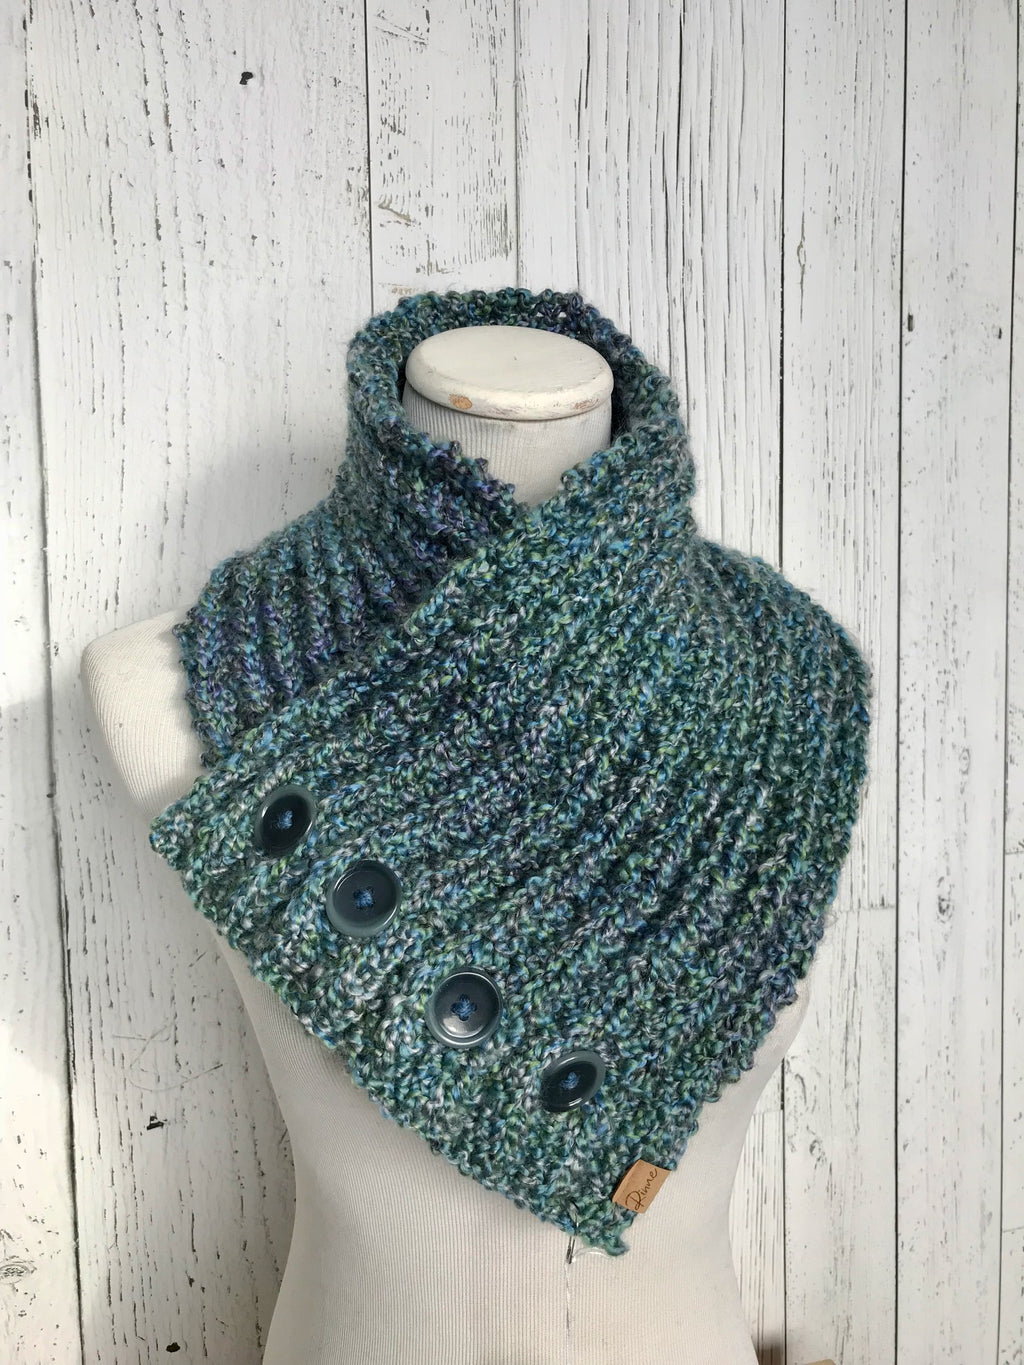 Classic Knit Button Cowl in blues and greens with dark teal buttons